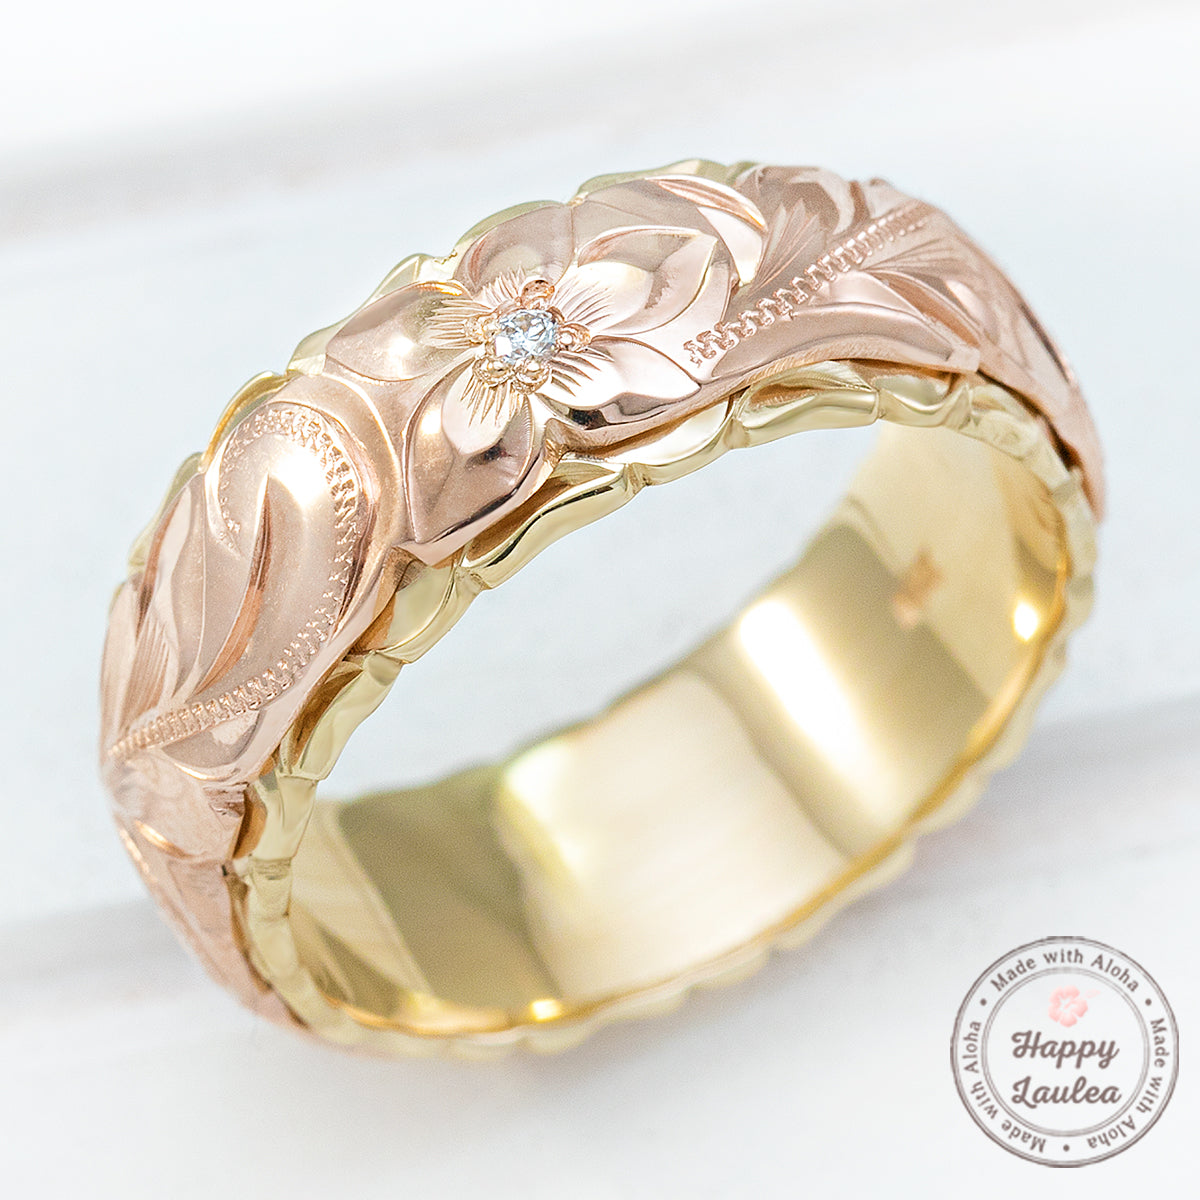 14K Gold Two Tone Ring With Hawaiian Hand Engraved Heritage Design